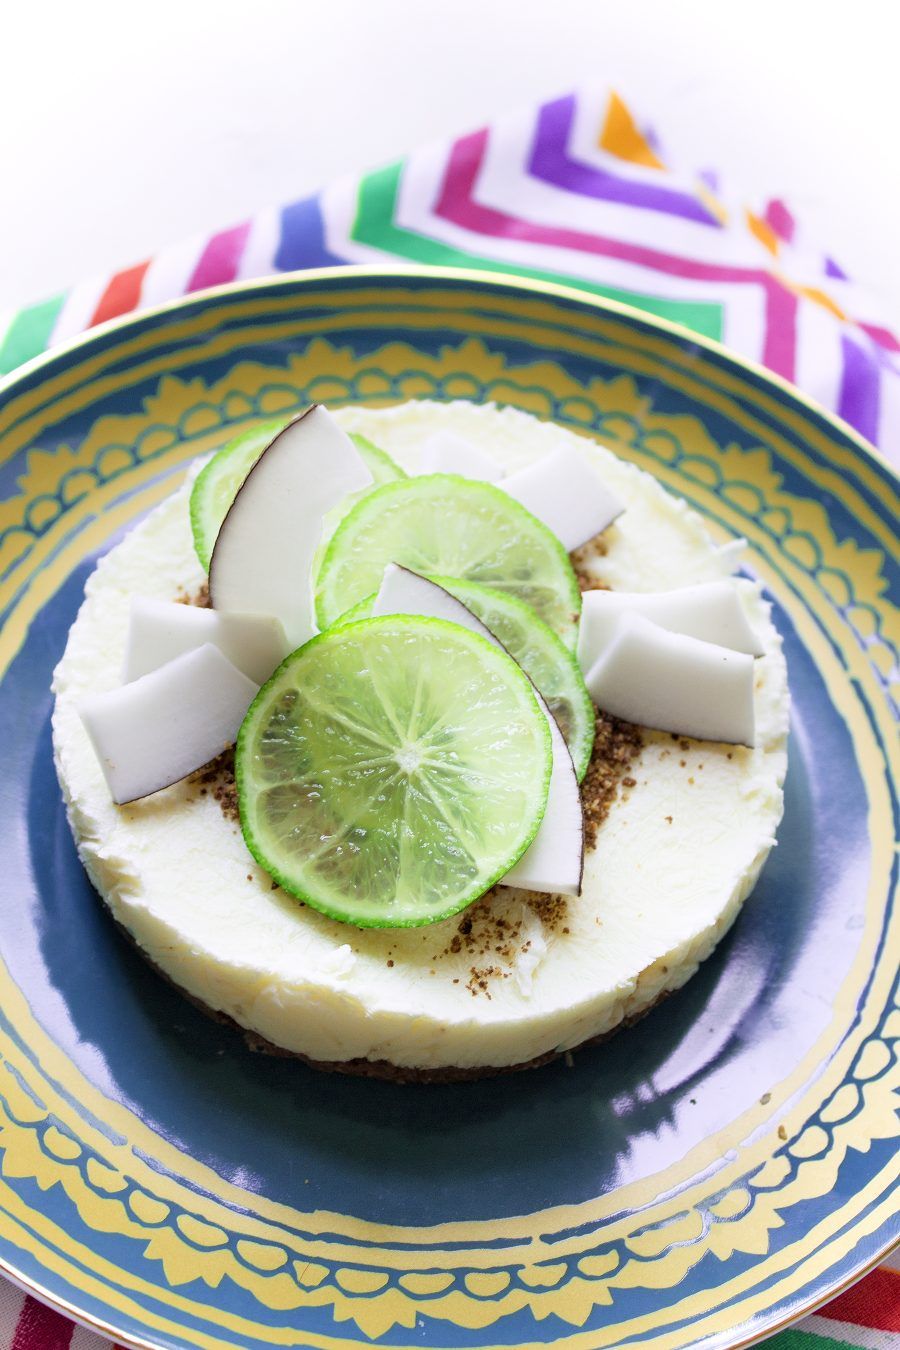 cheesecake-lime-cocco-4-contemporaneo-food